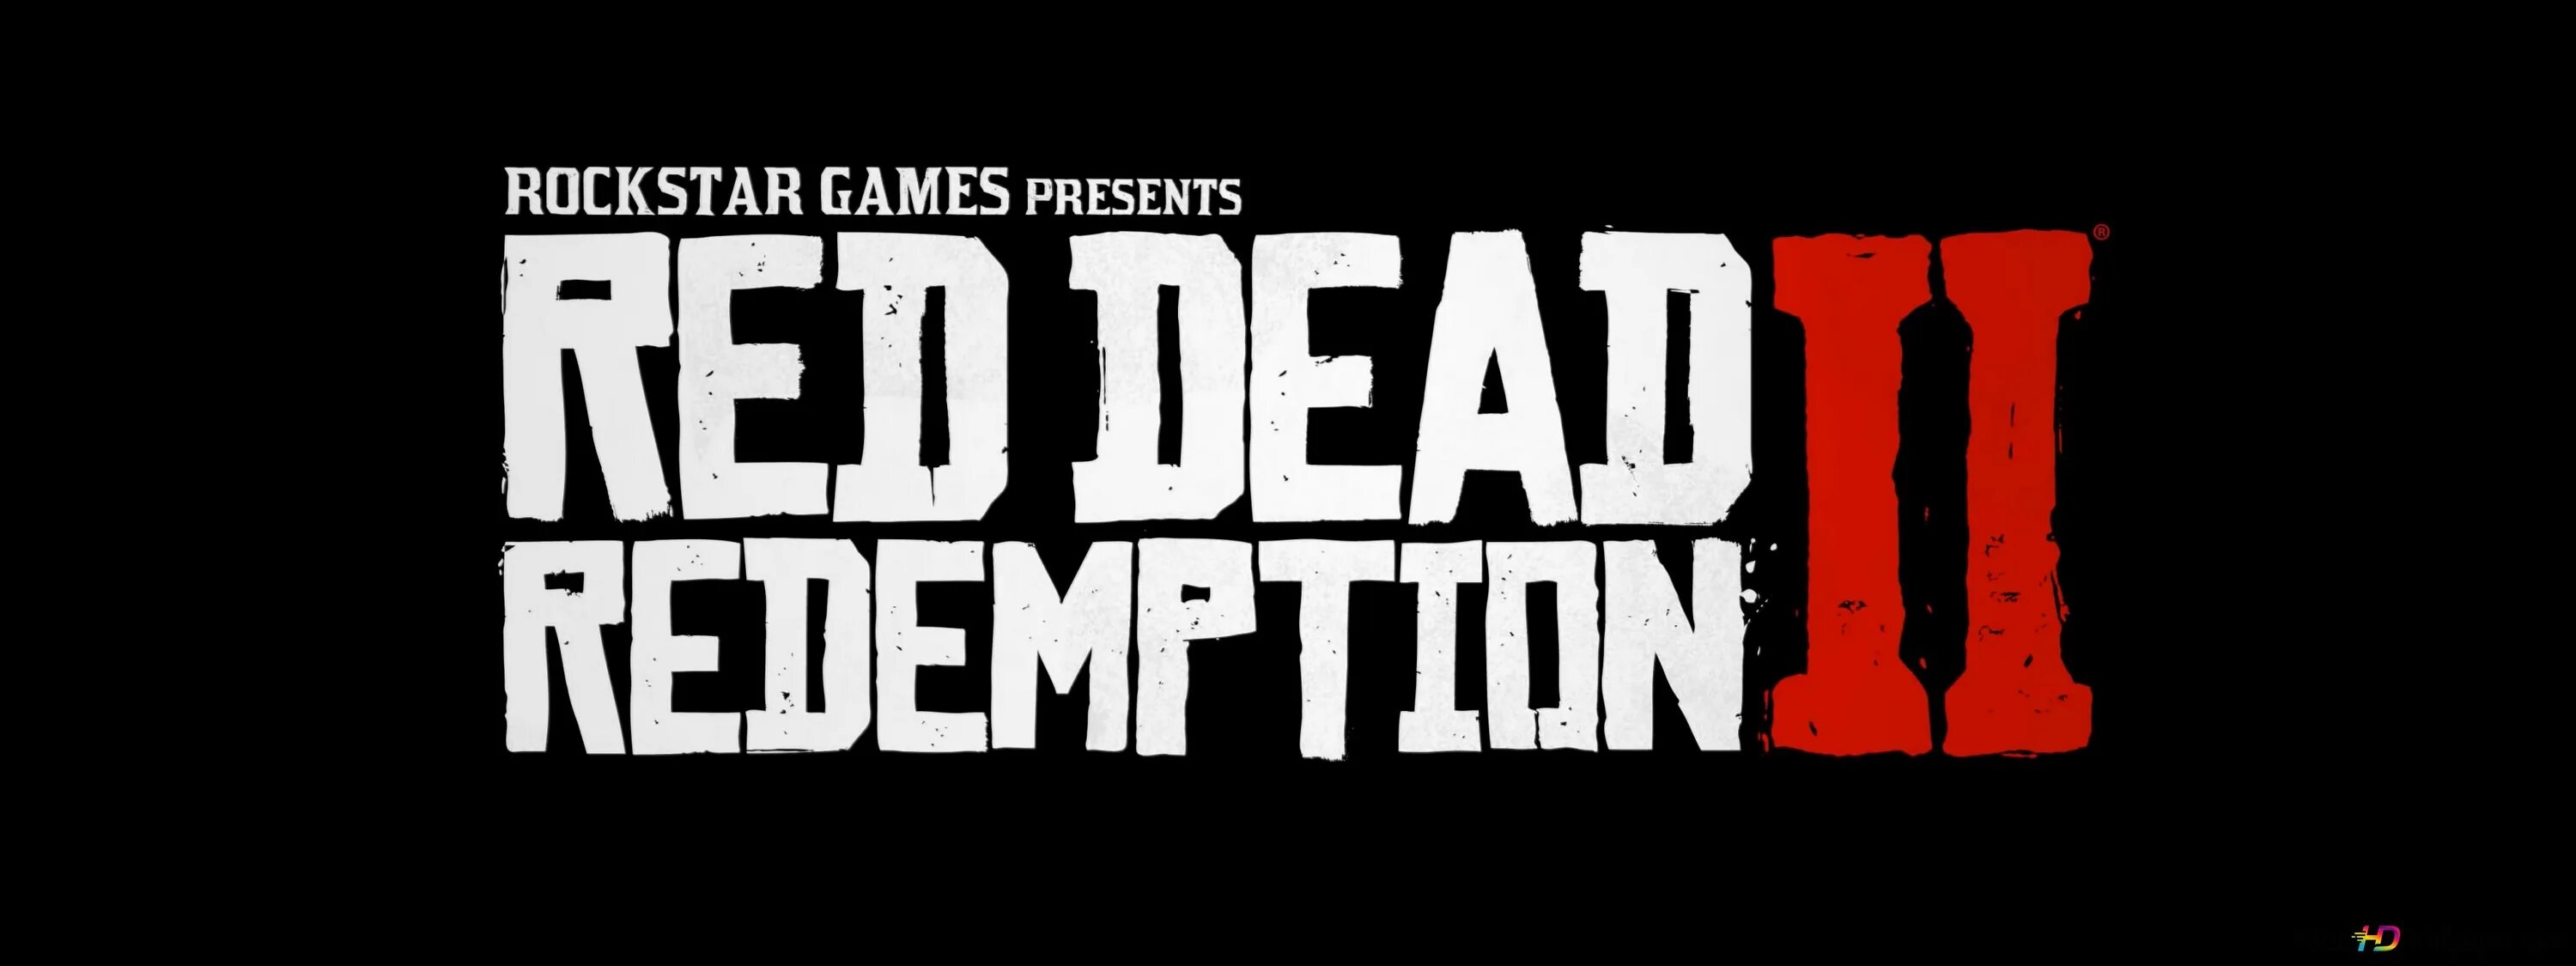 Game is past. Шрифт рокстар. Обои Rockstar games presents. Логотип рокстар. Red Dead Redemption 1920x1080 21:9.